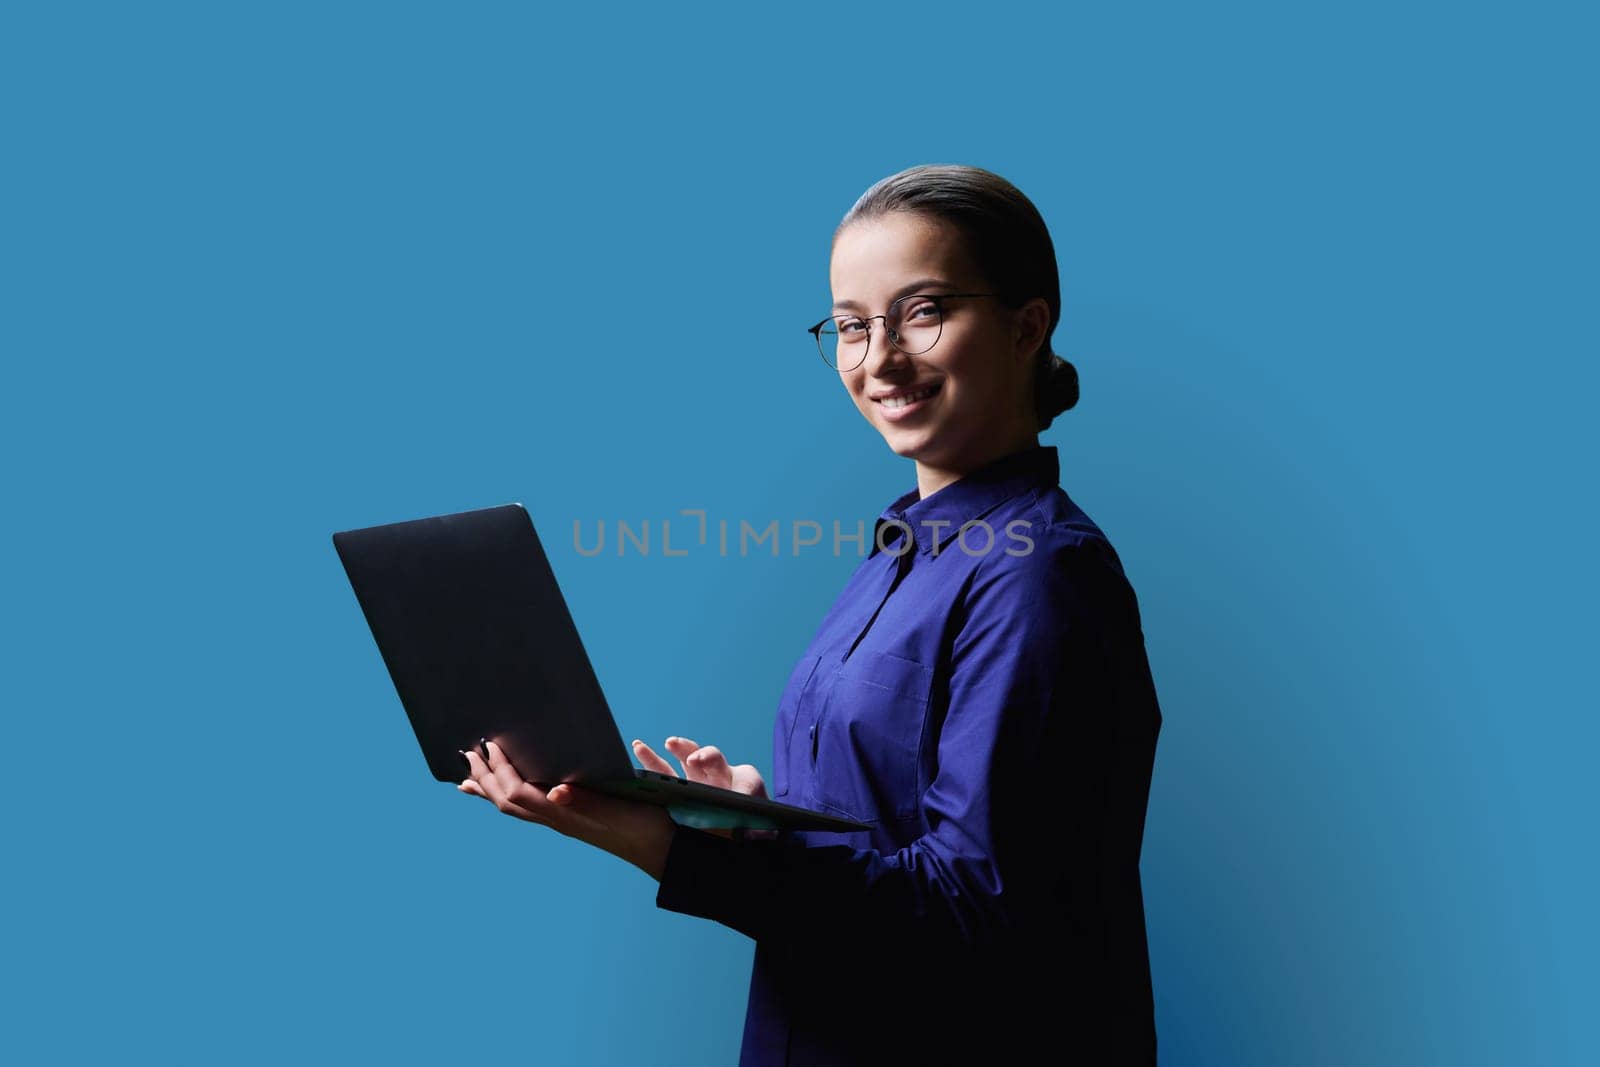 Teenage girl high school student using laptop looking at camera on blue background. Education, learning, technology, adolescence concept